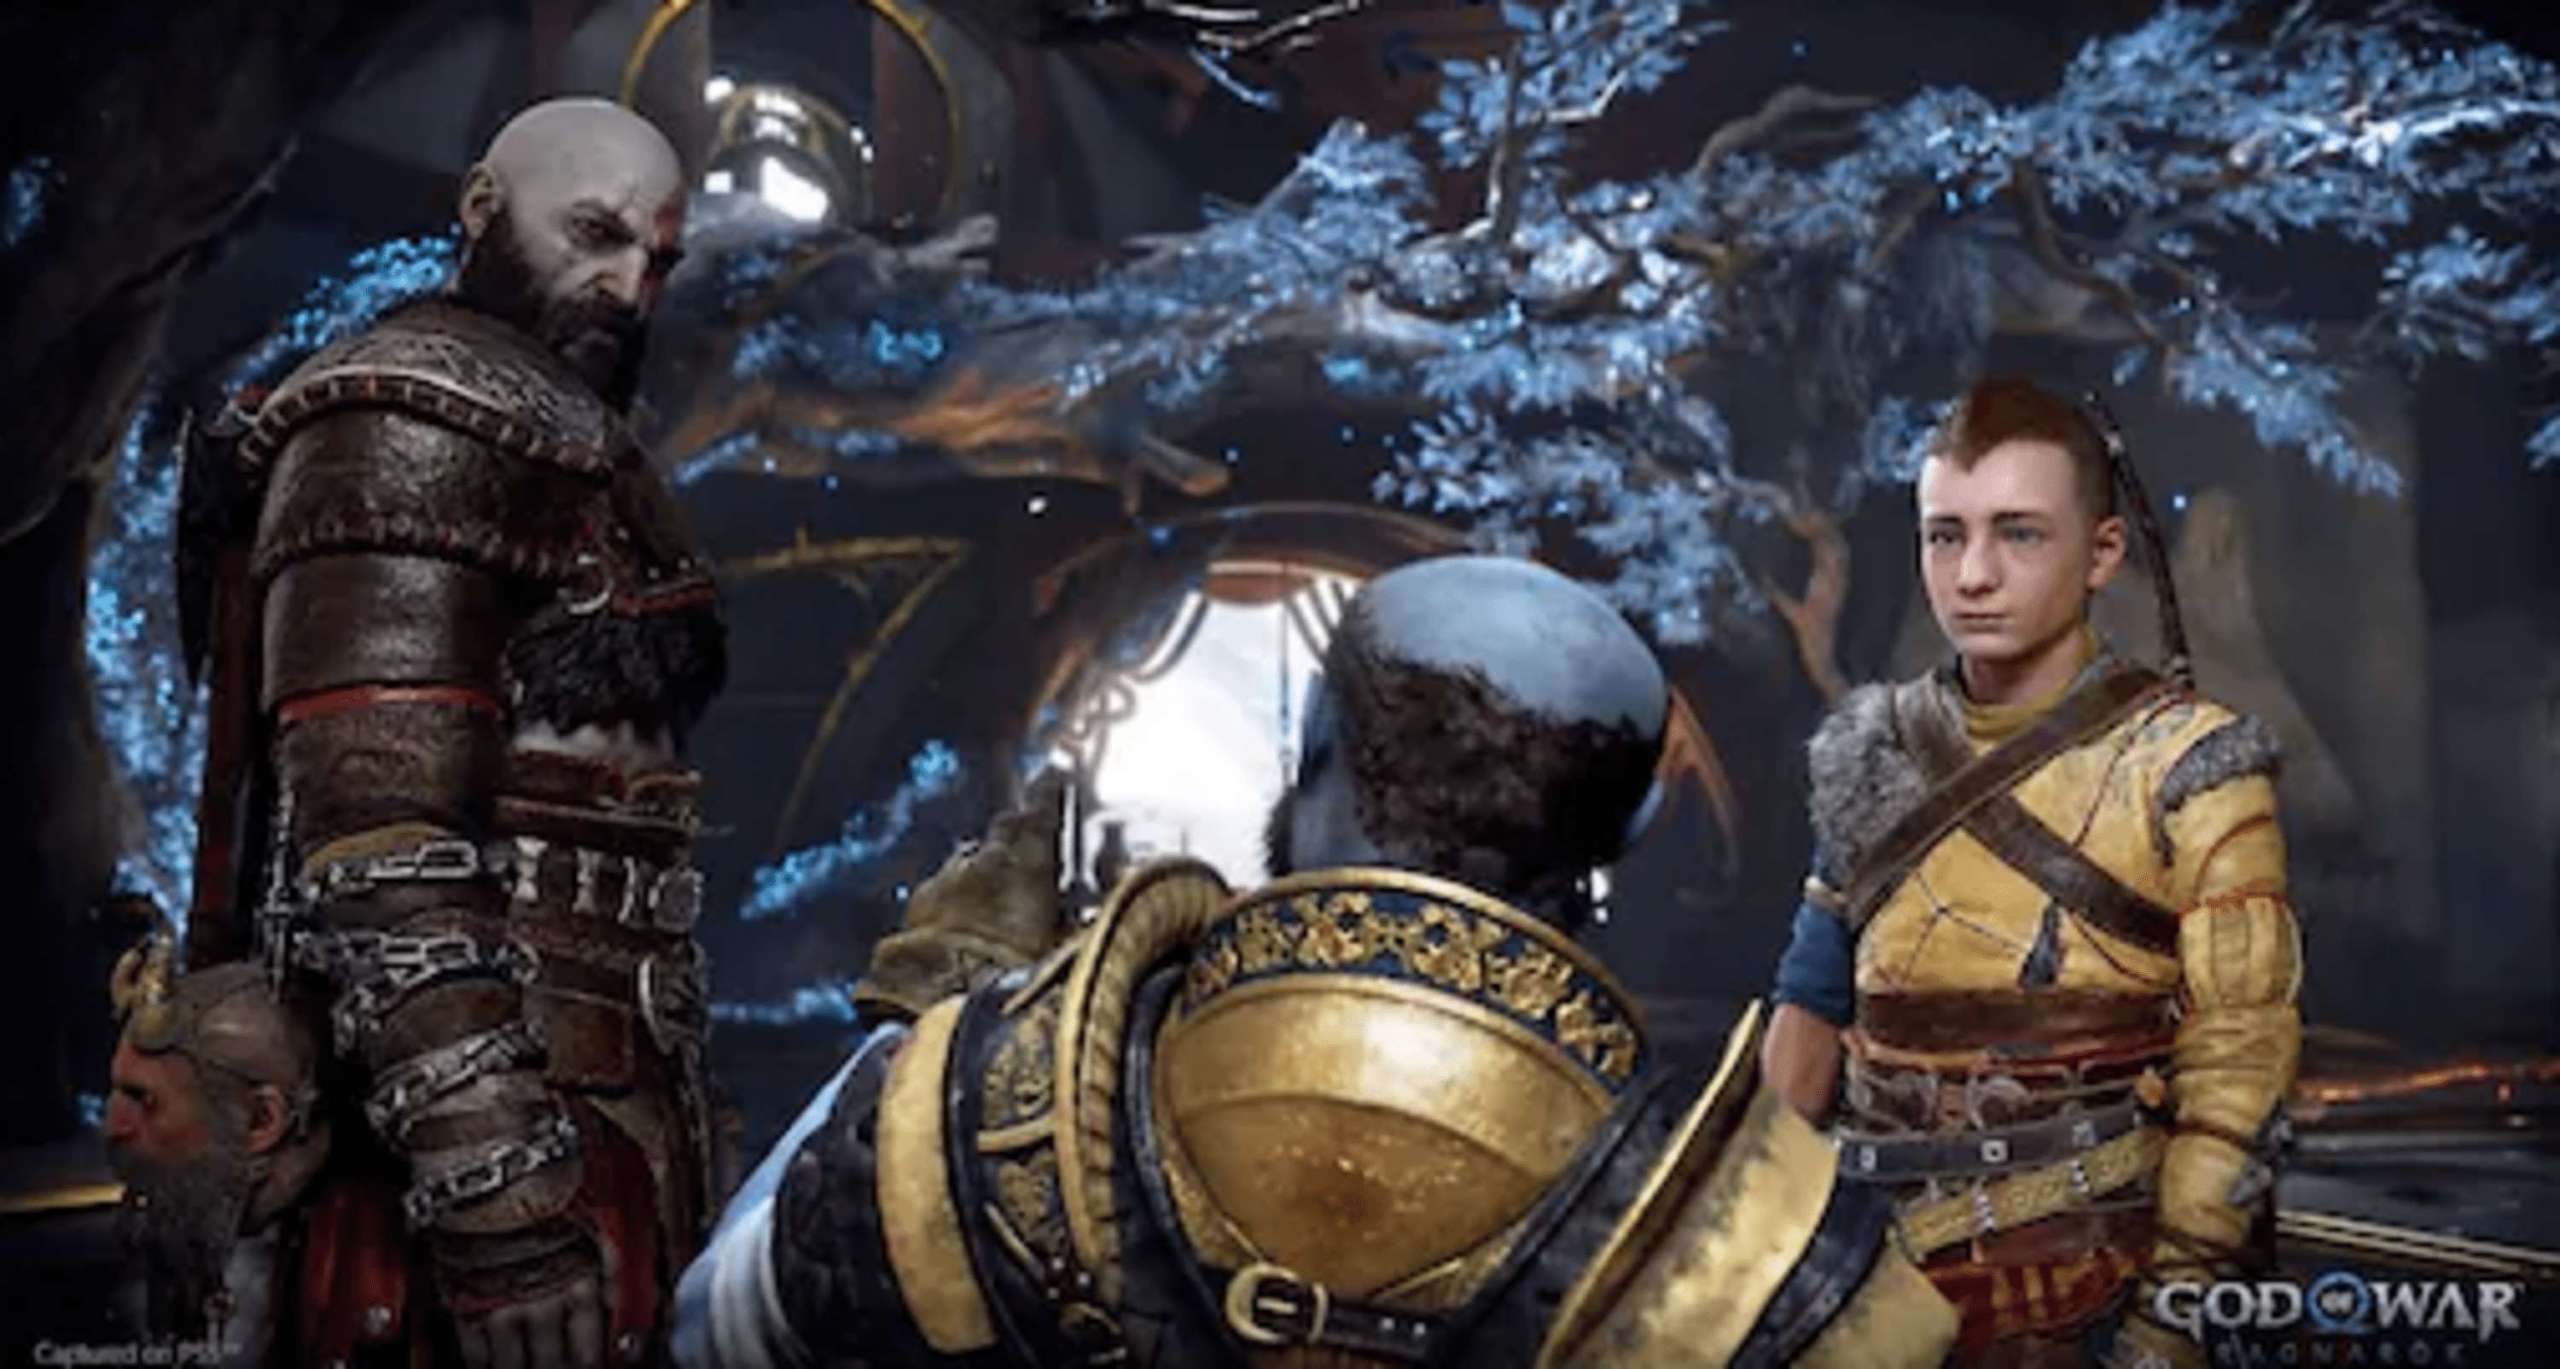 The Artwork From God Of War: Ragnarok Has Allegedly Been Released On The Internet